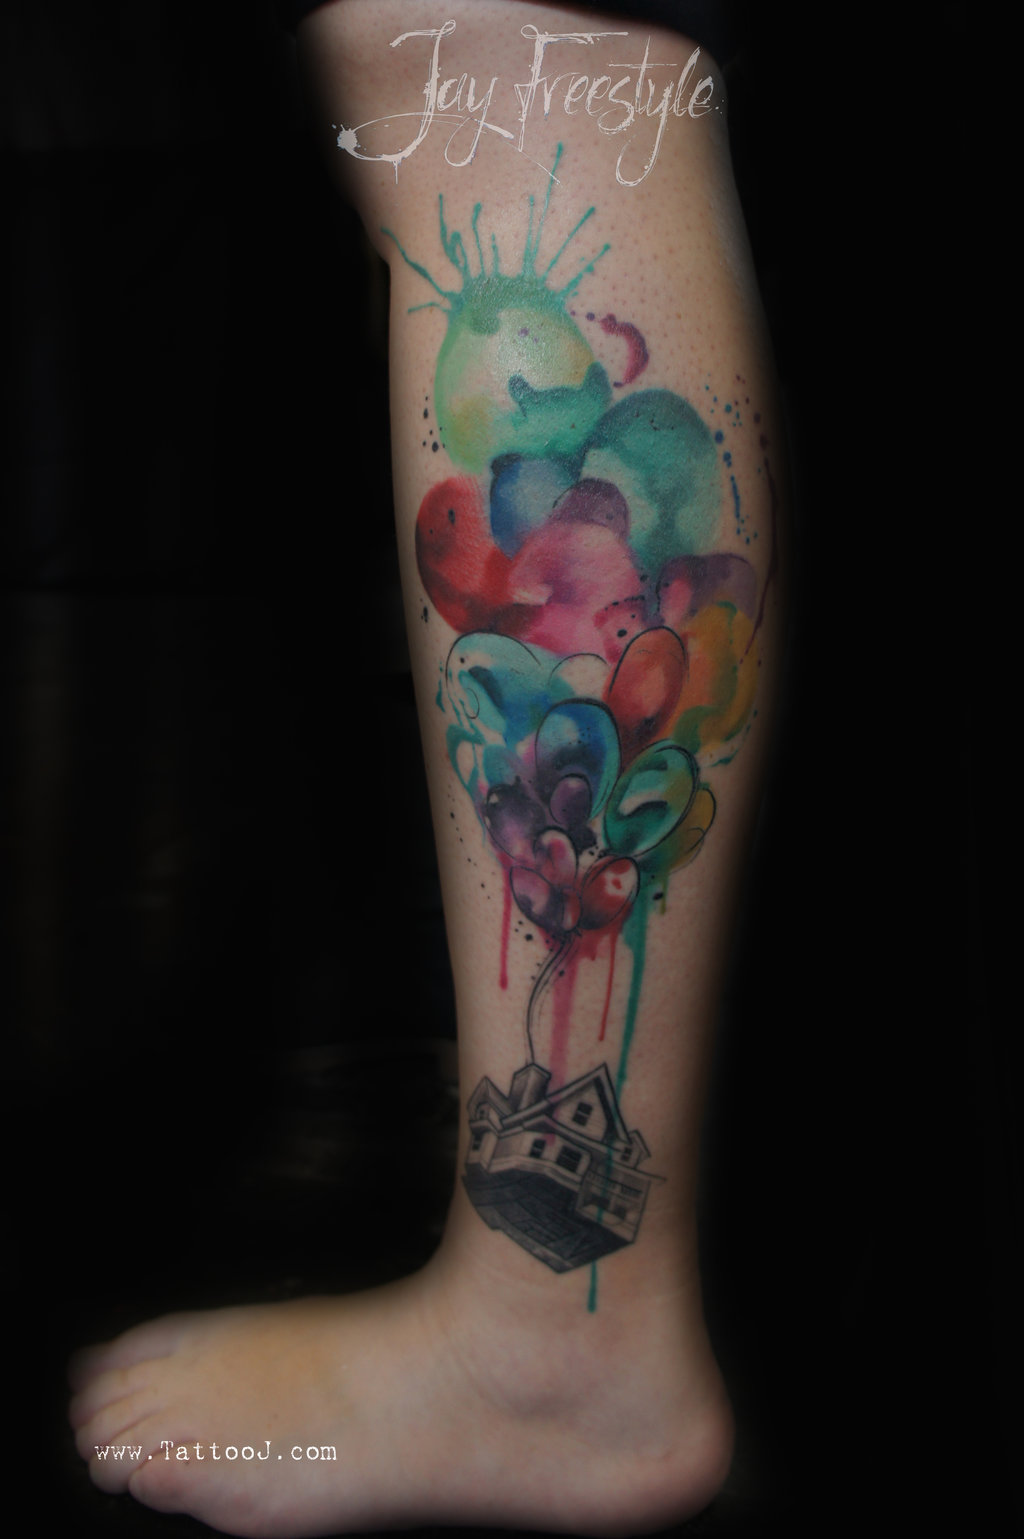 House Flying With Watercolor Balloons Tattoo On Leg By JayFreestyle